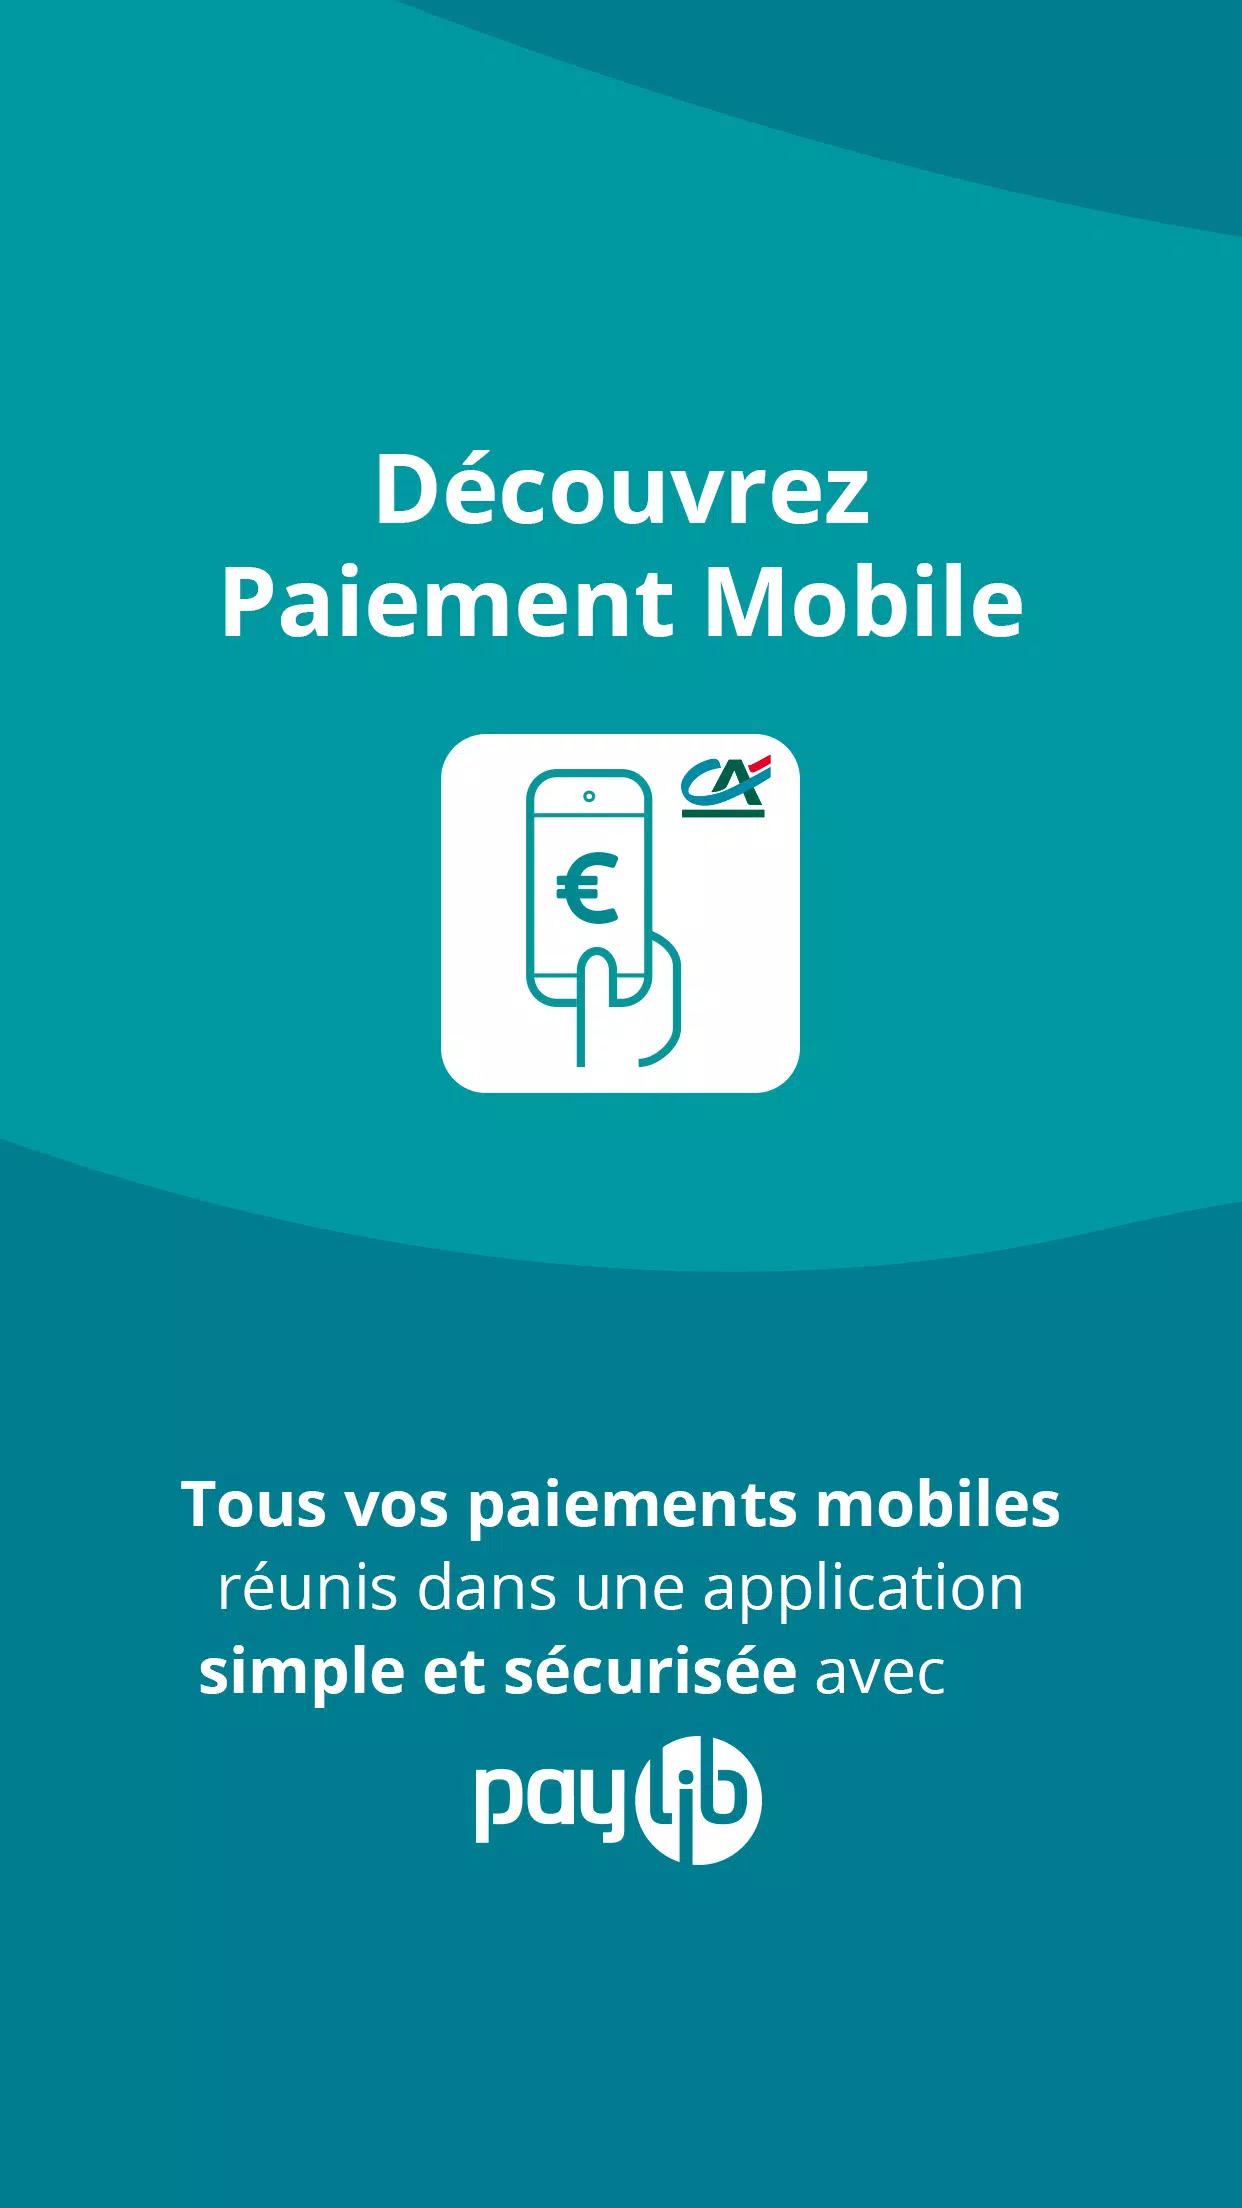 Paiement mobile CA for Android - APK Download